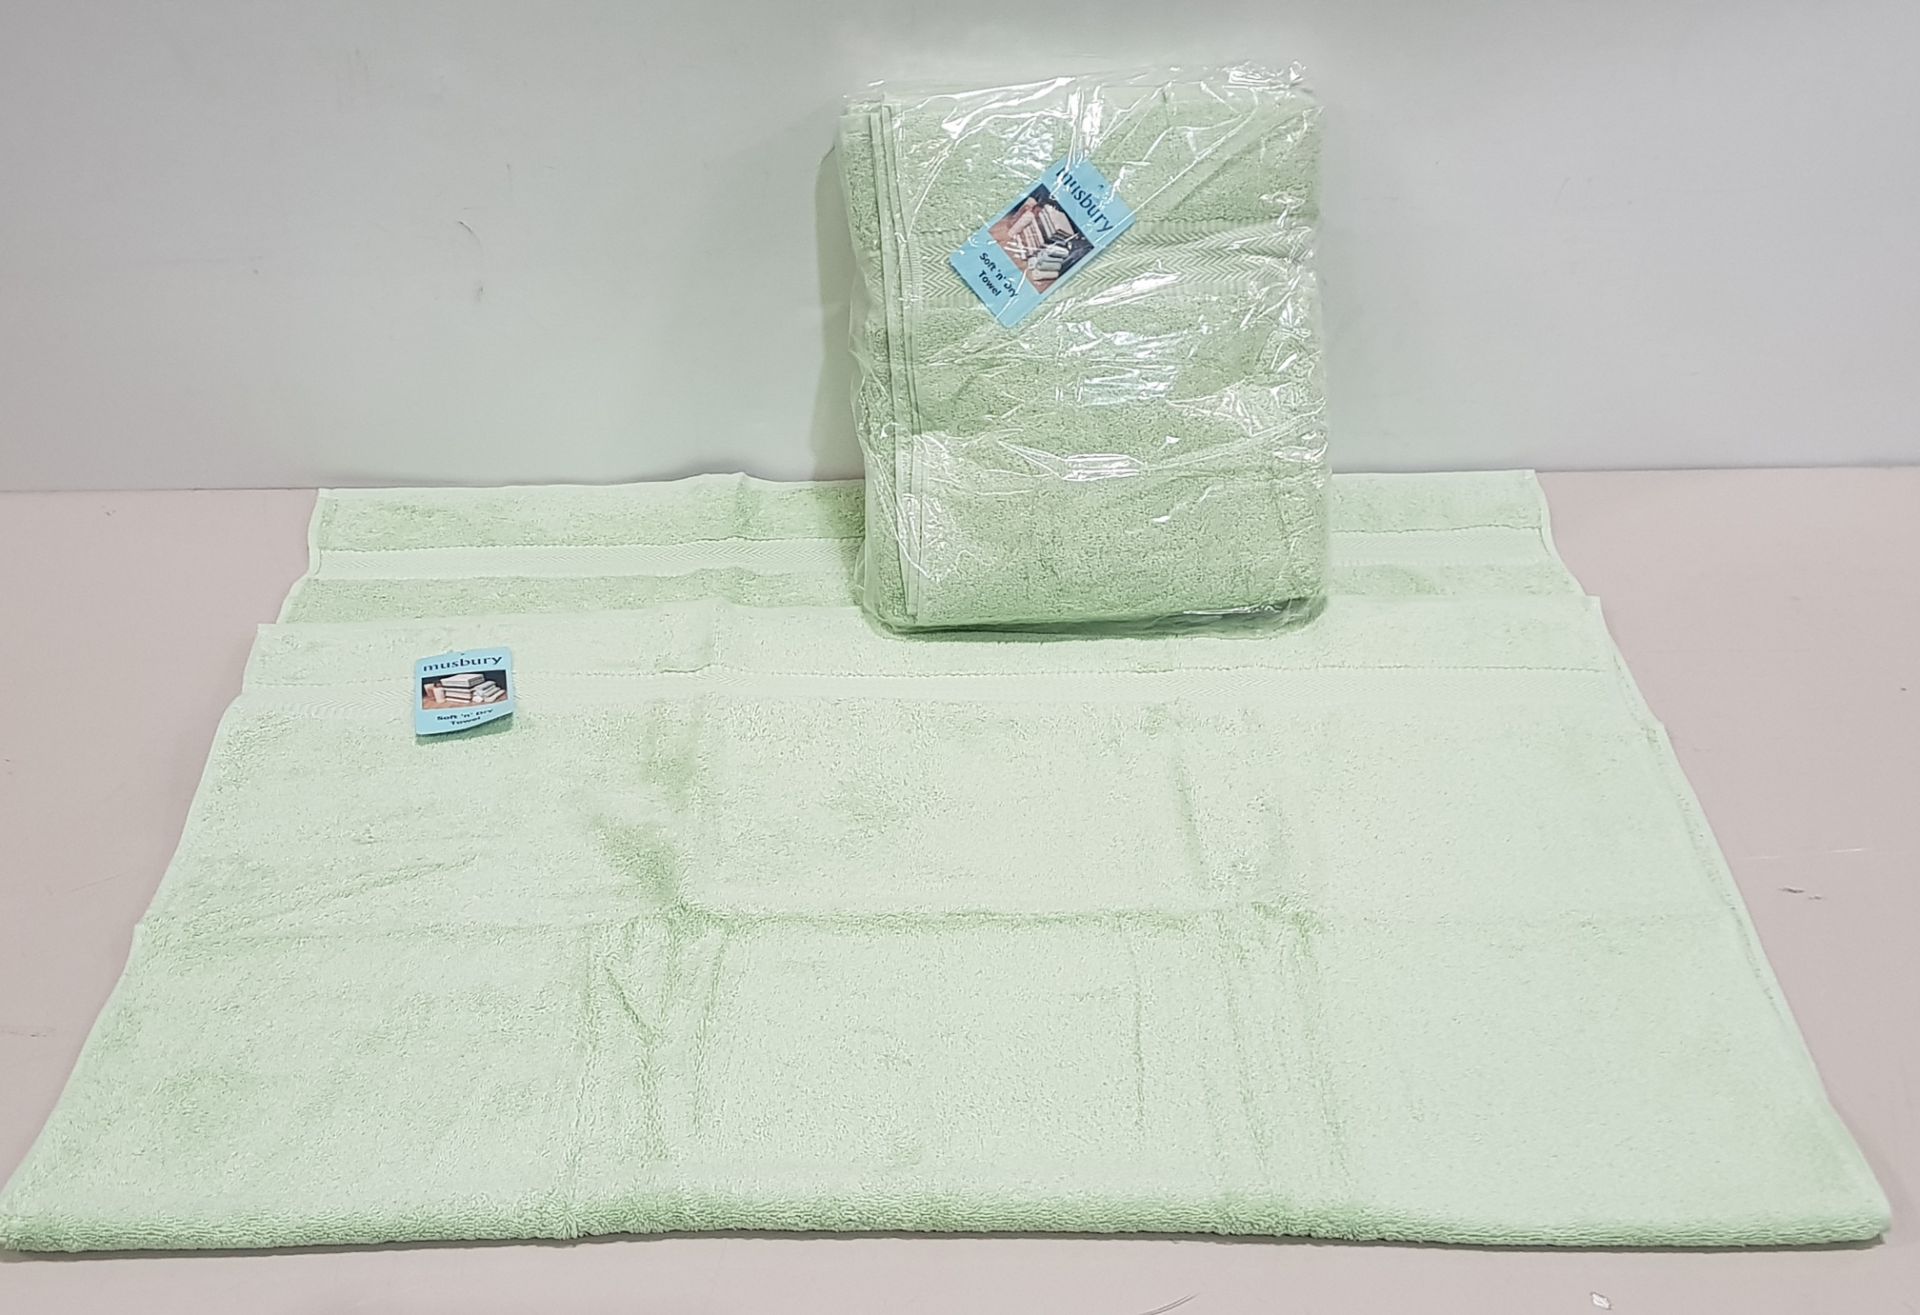 20 X BRAND NEW MUSBURY SOFT 'N' DRY BATH TOWELS IN GREEN COLOUR (SIZE : 100 X 150 CM ) - IN 1 BOX